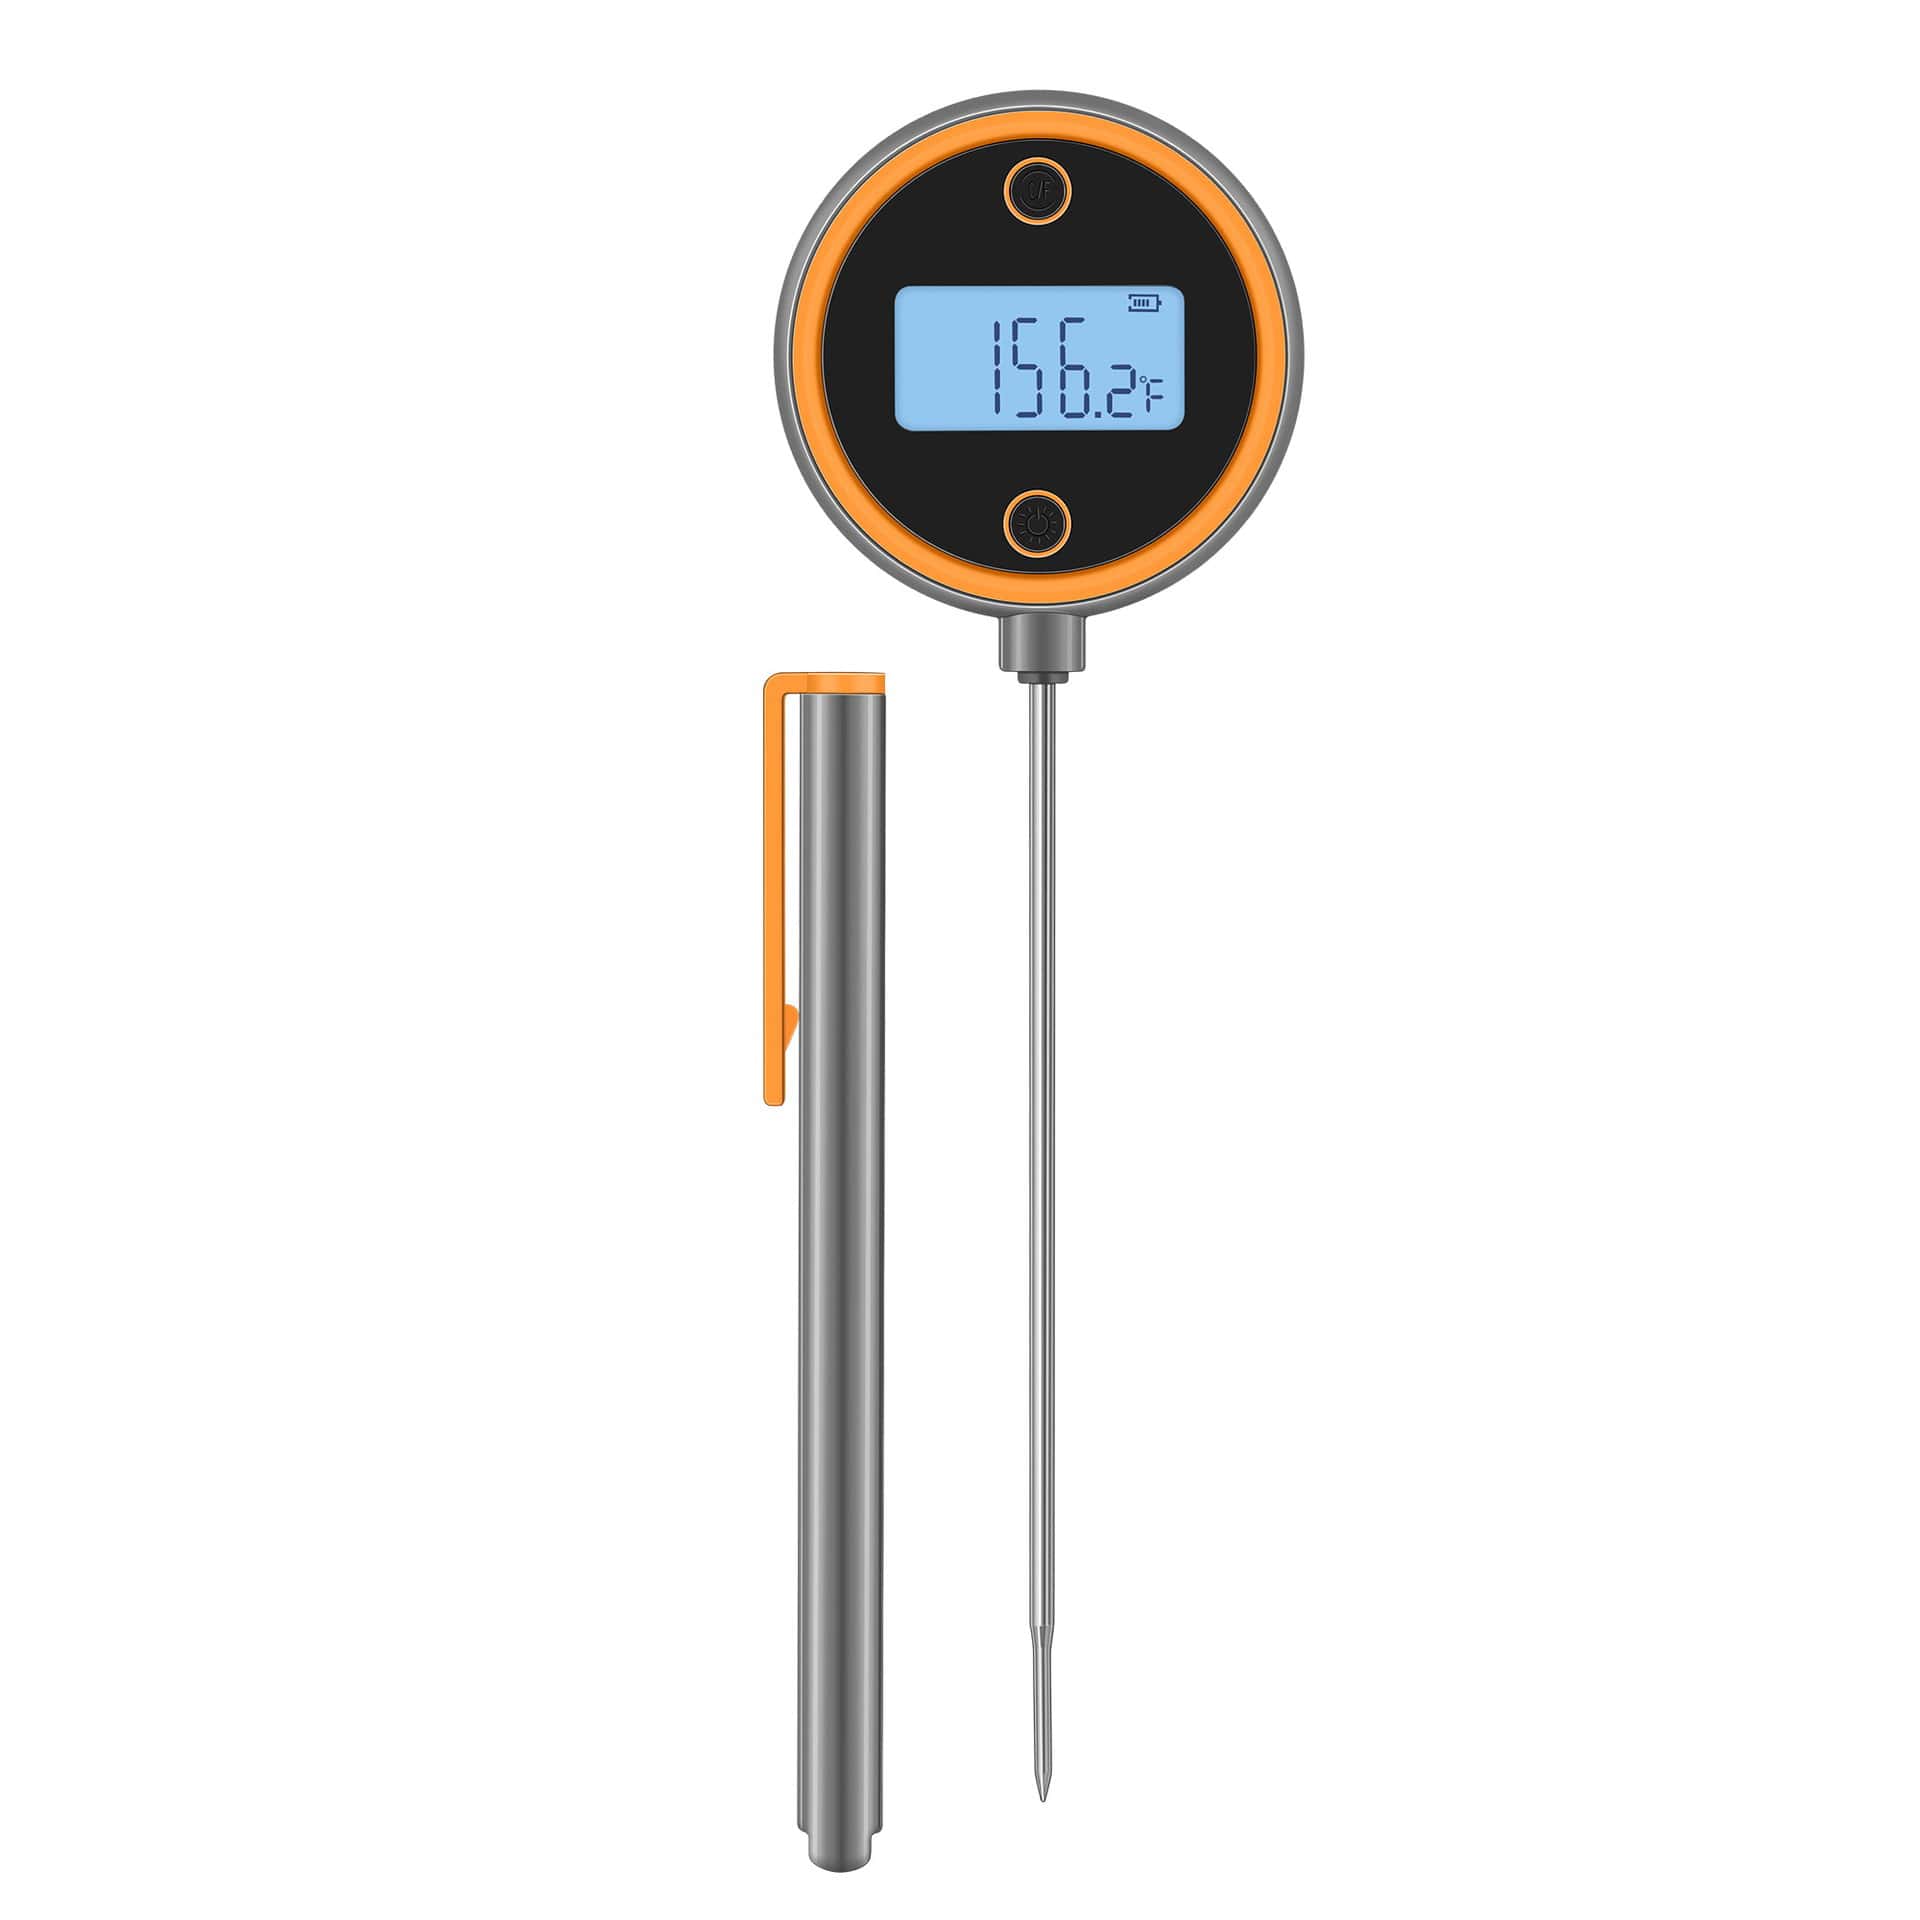 https://www.chefstemp.com/wp-content/uploads/2021/08/chefstemp-pocket-pro-cooking-thermometer-03.jpg